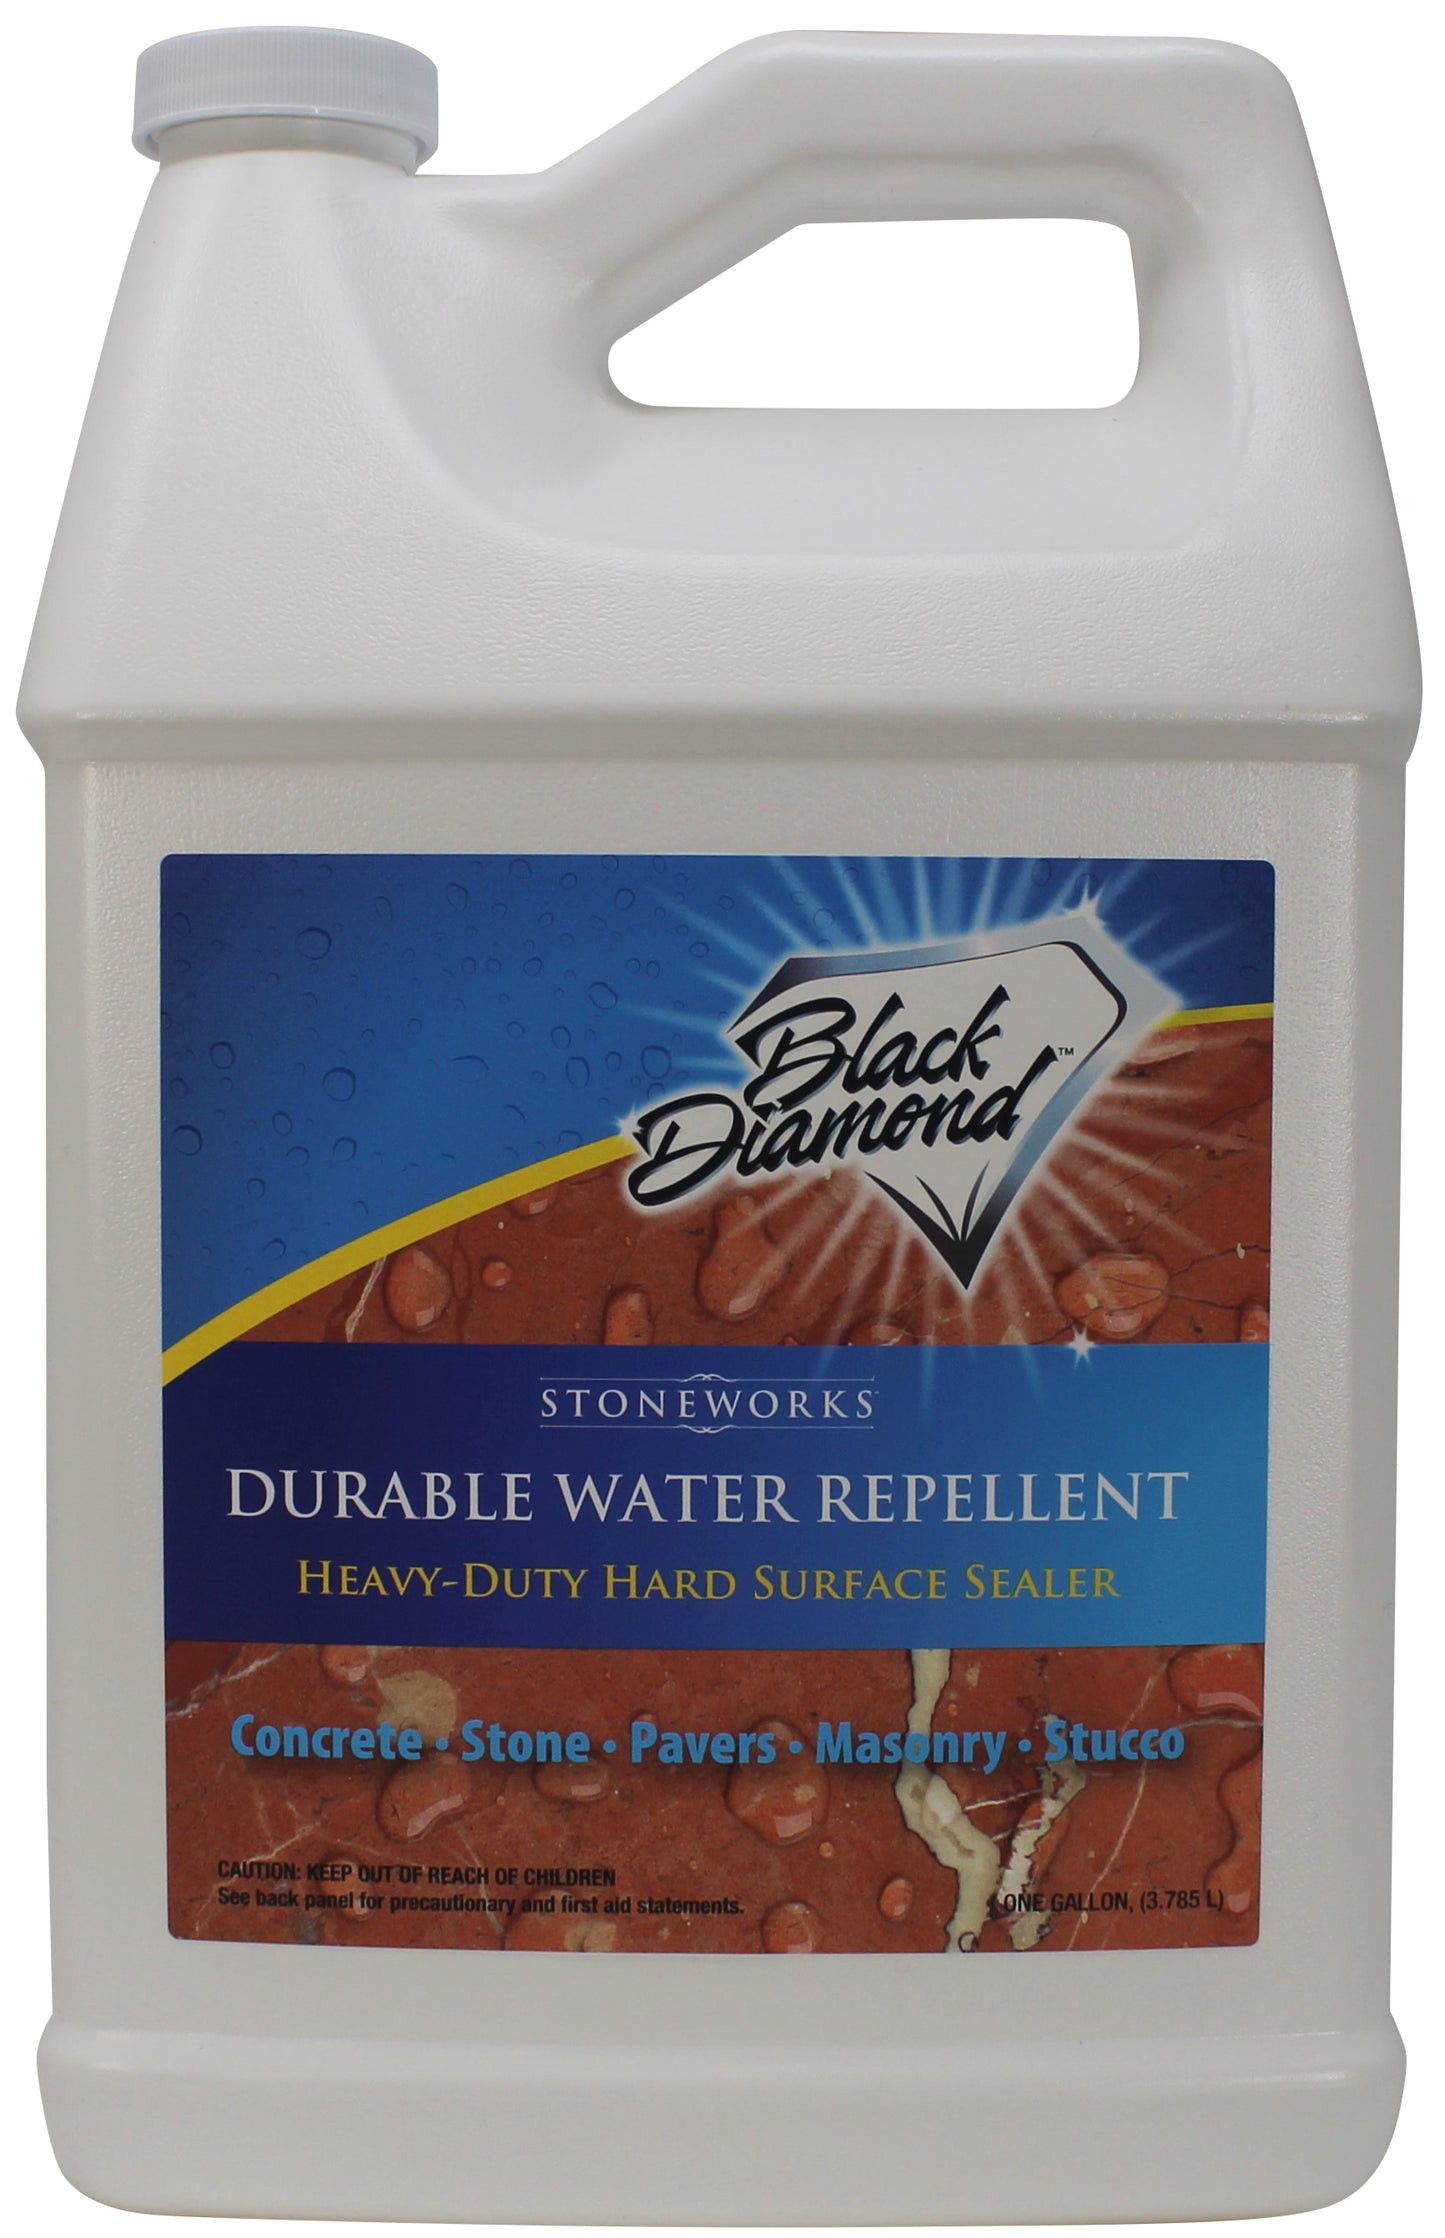 Durable Water Repellent Penetrating Sealer: Concrete Driveways, Brick, Masonry, Pavers. Protects Surface up to 10 Years. Black Diamond Stoneworks.